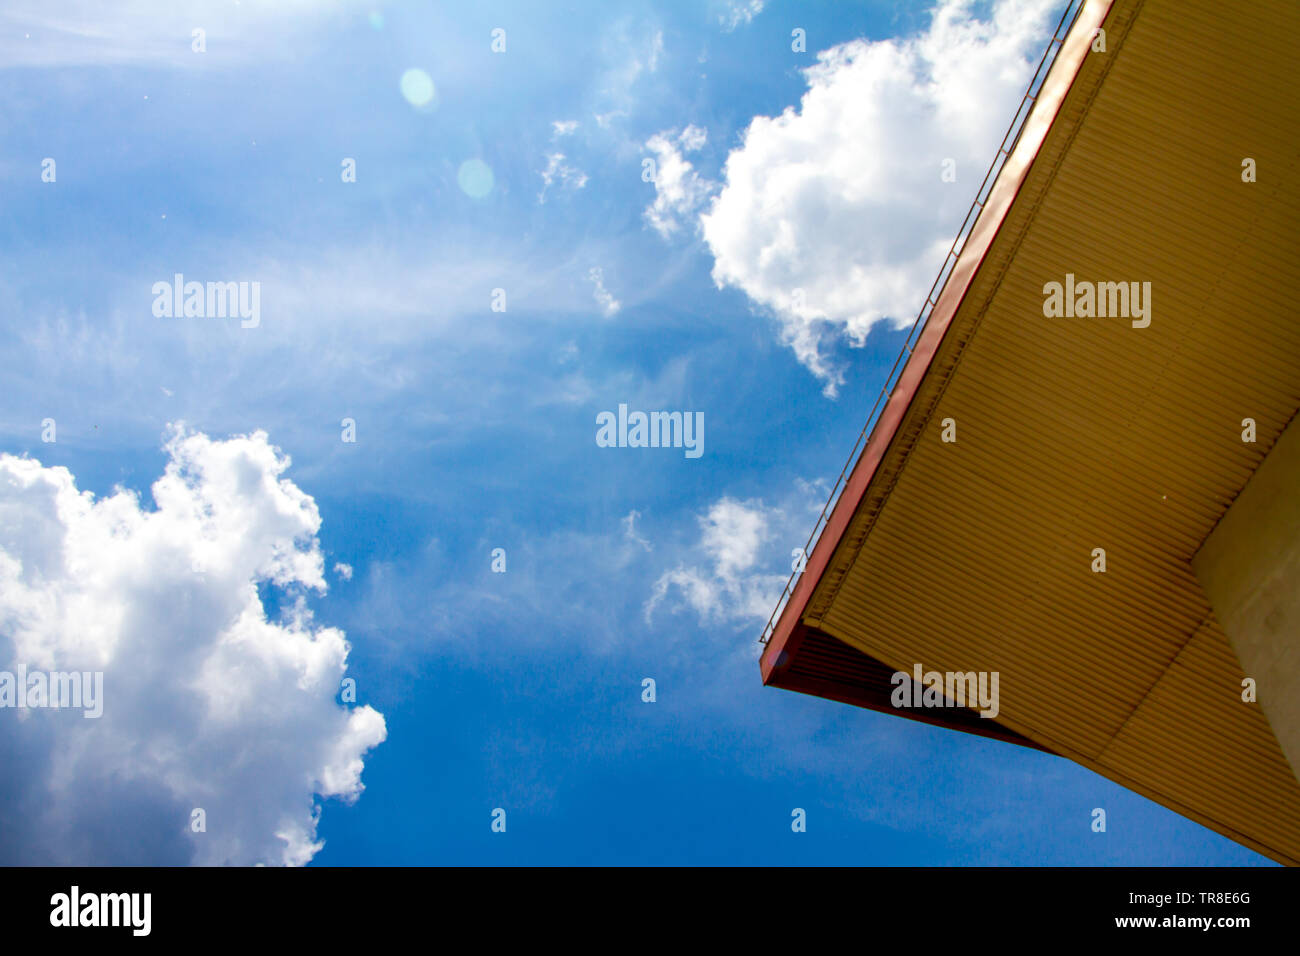 Bottom view of the edge of the roof of the building against the blue sky and clouds, free space for text Stock Photo